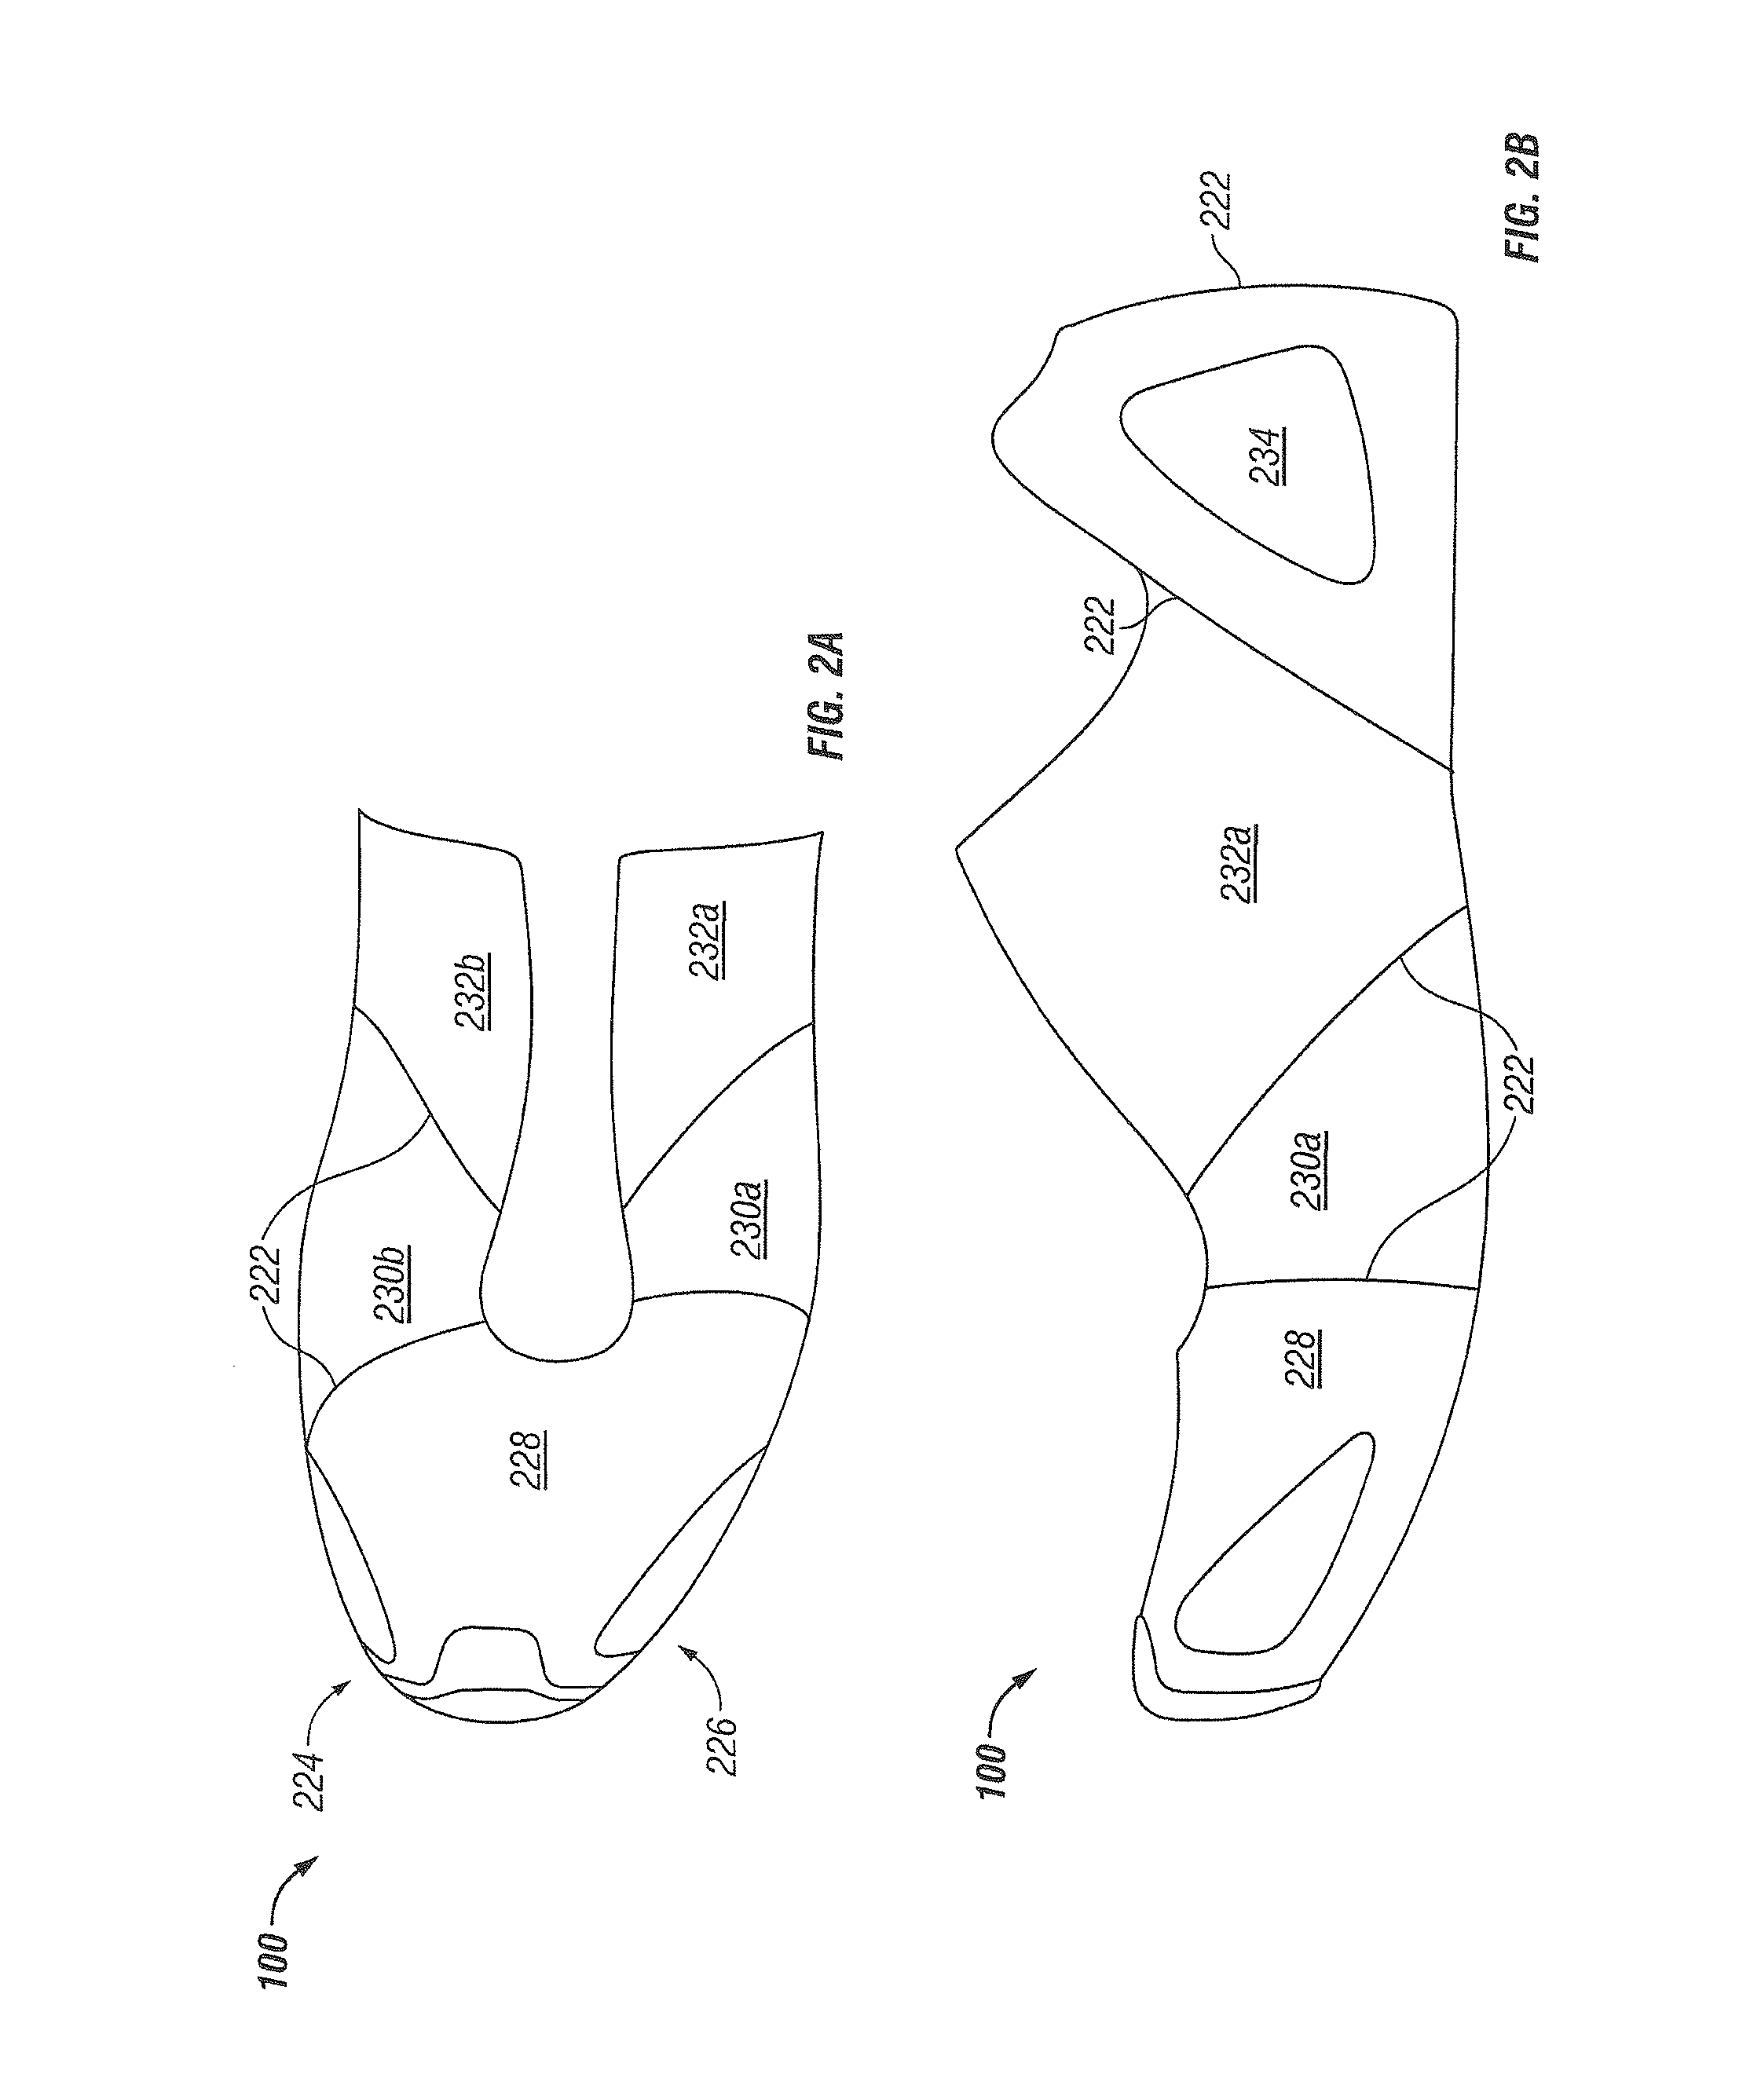 Smooth shoe uppers and methods for producing them